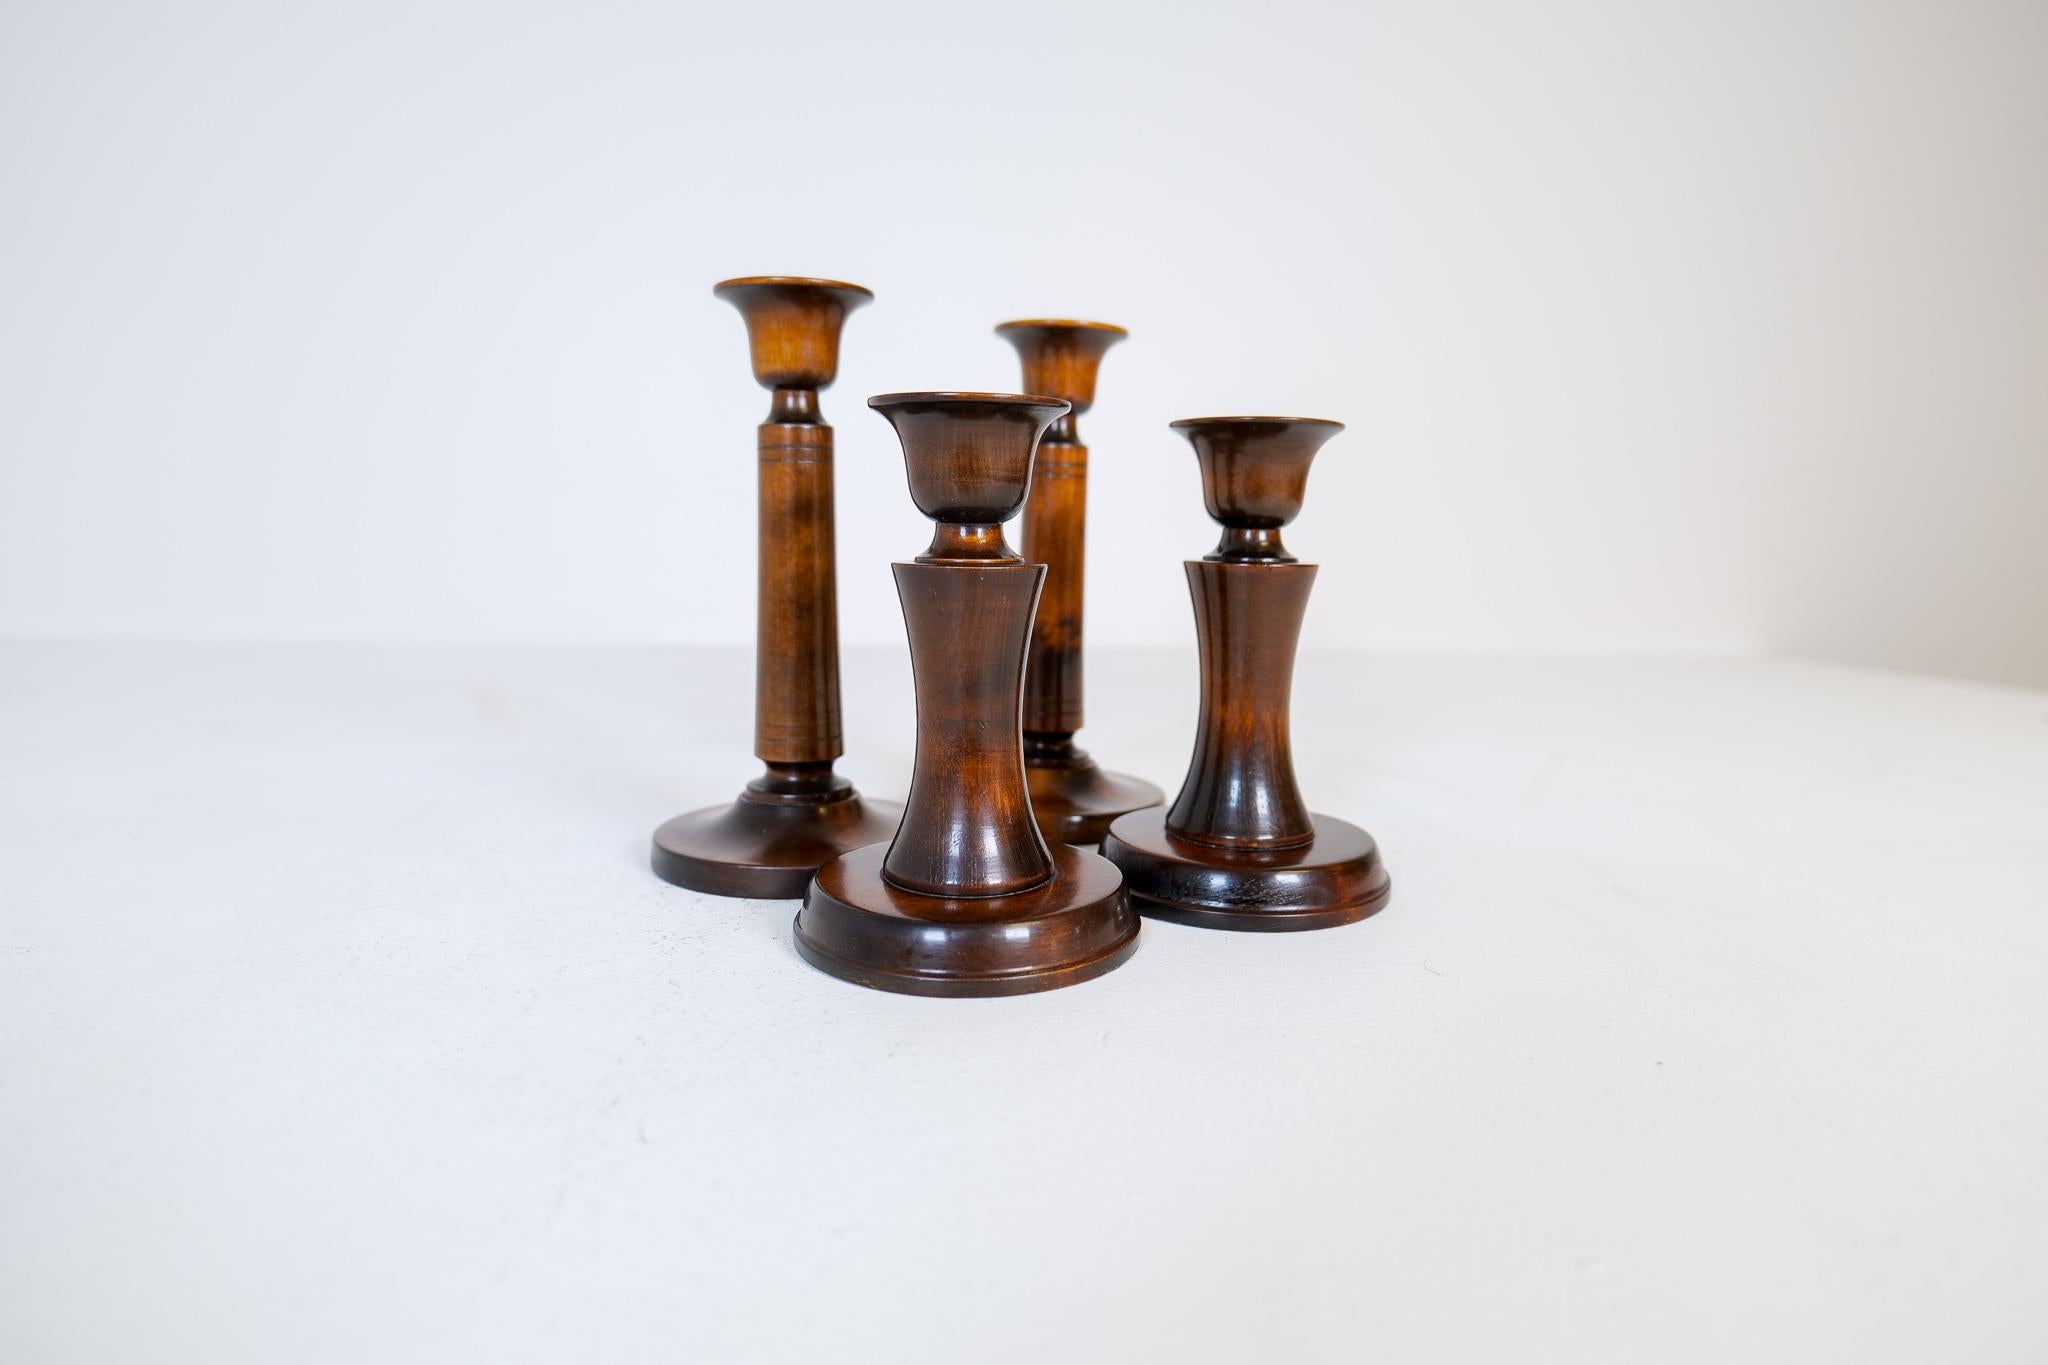 Lacquered Midcentury Set of 4 Candlesticks in Birch Carl Malmsten Sweden 1960s For Sale